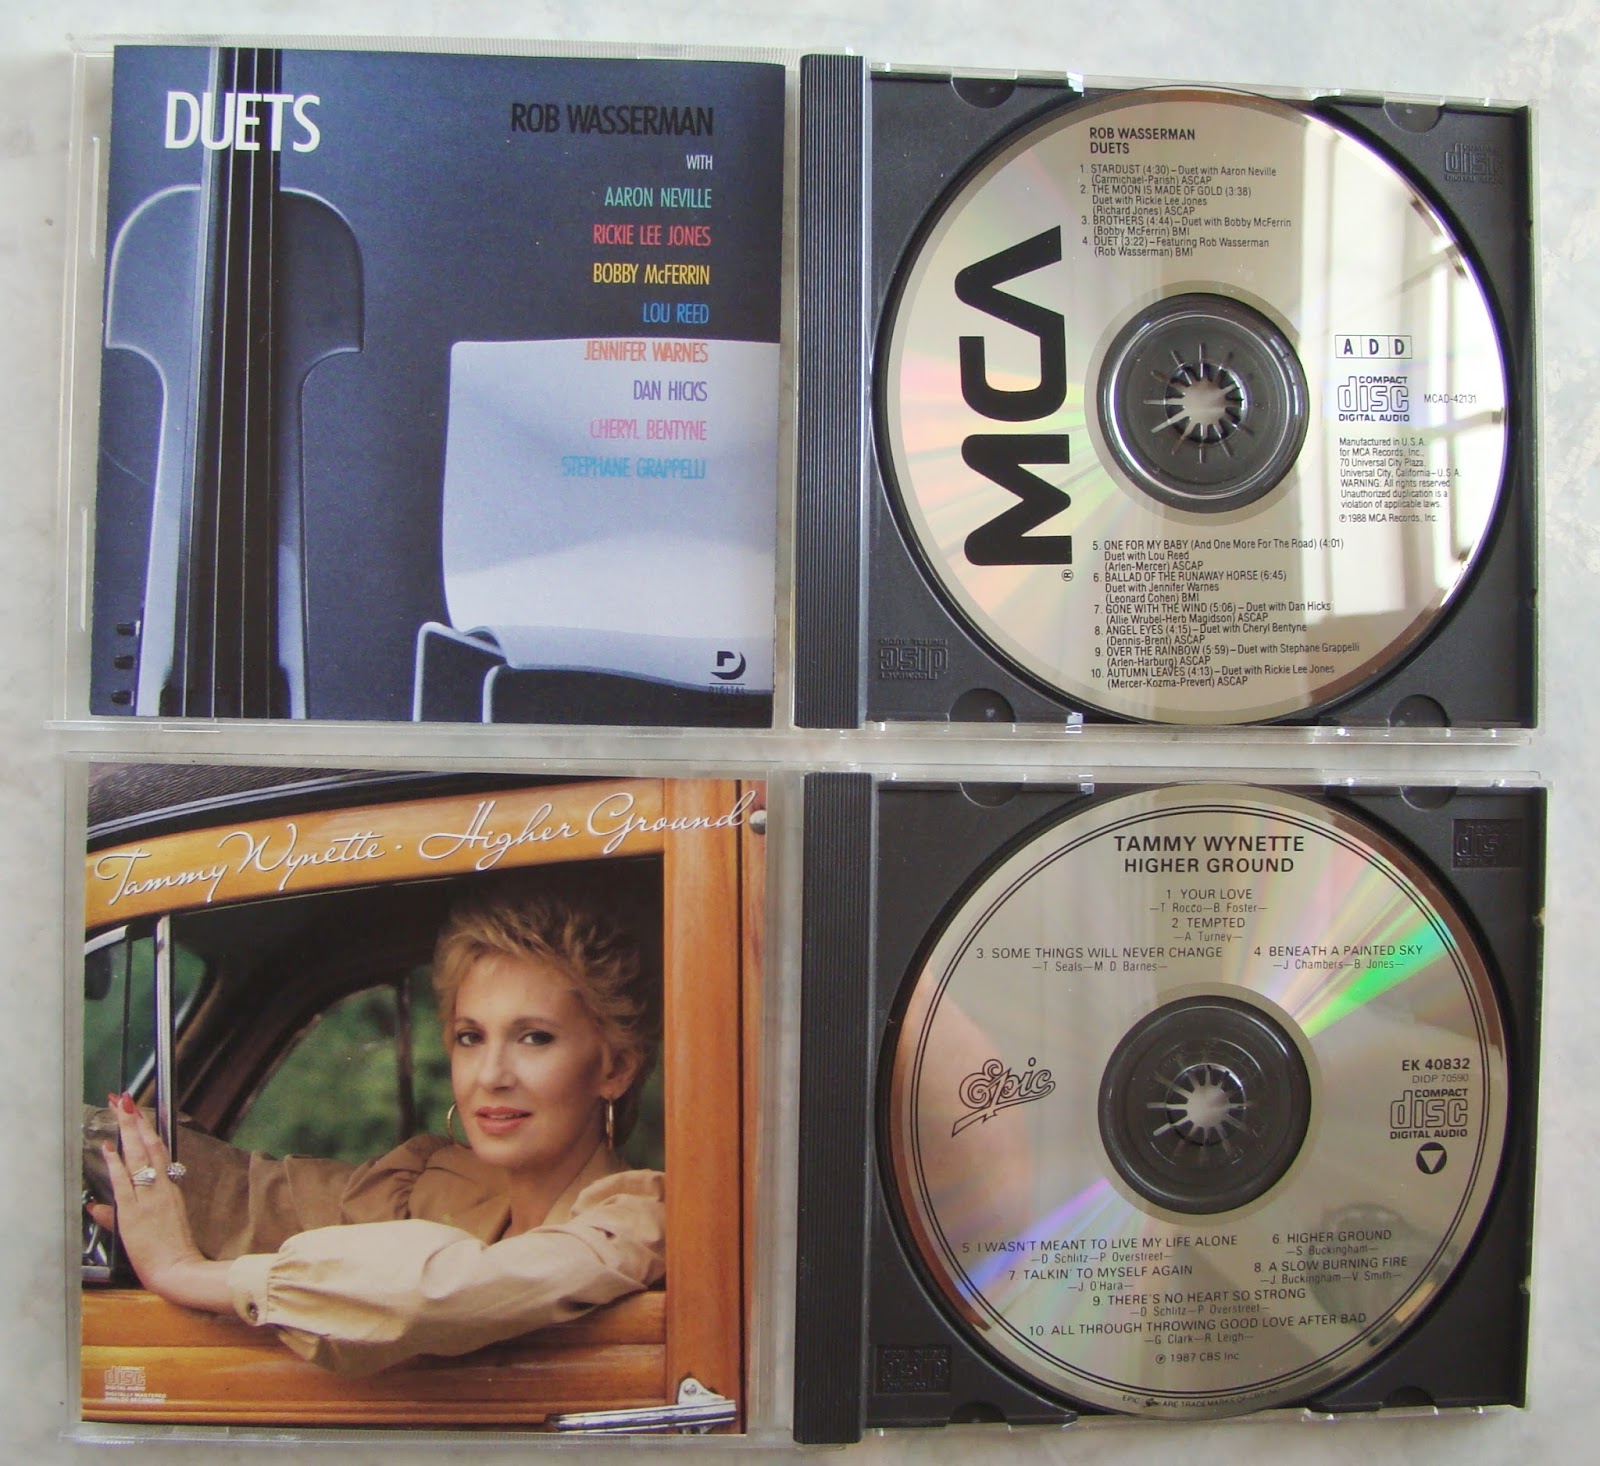 Imported audiophile CDs (sold) CD+rob+wesserman+duets